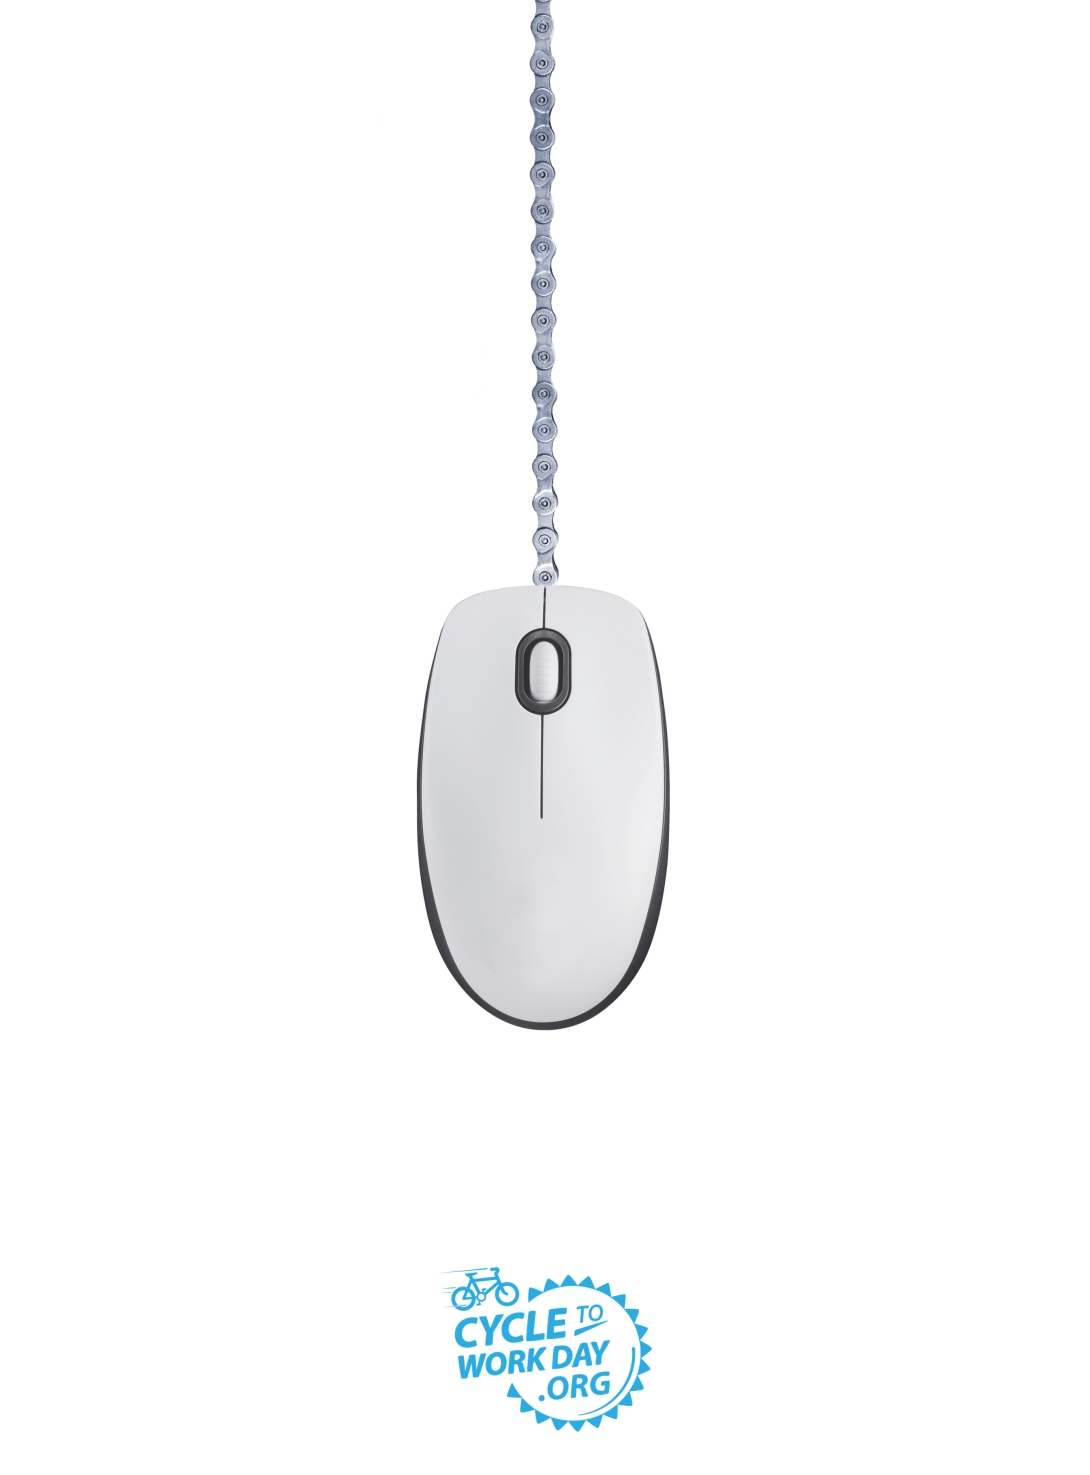 Poster idea for cycle to work day - computer mouse with bicycle chain